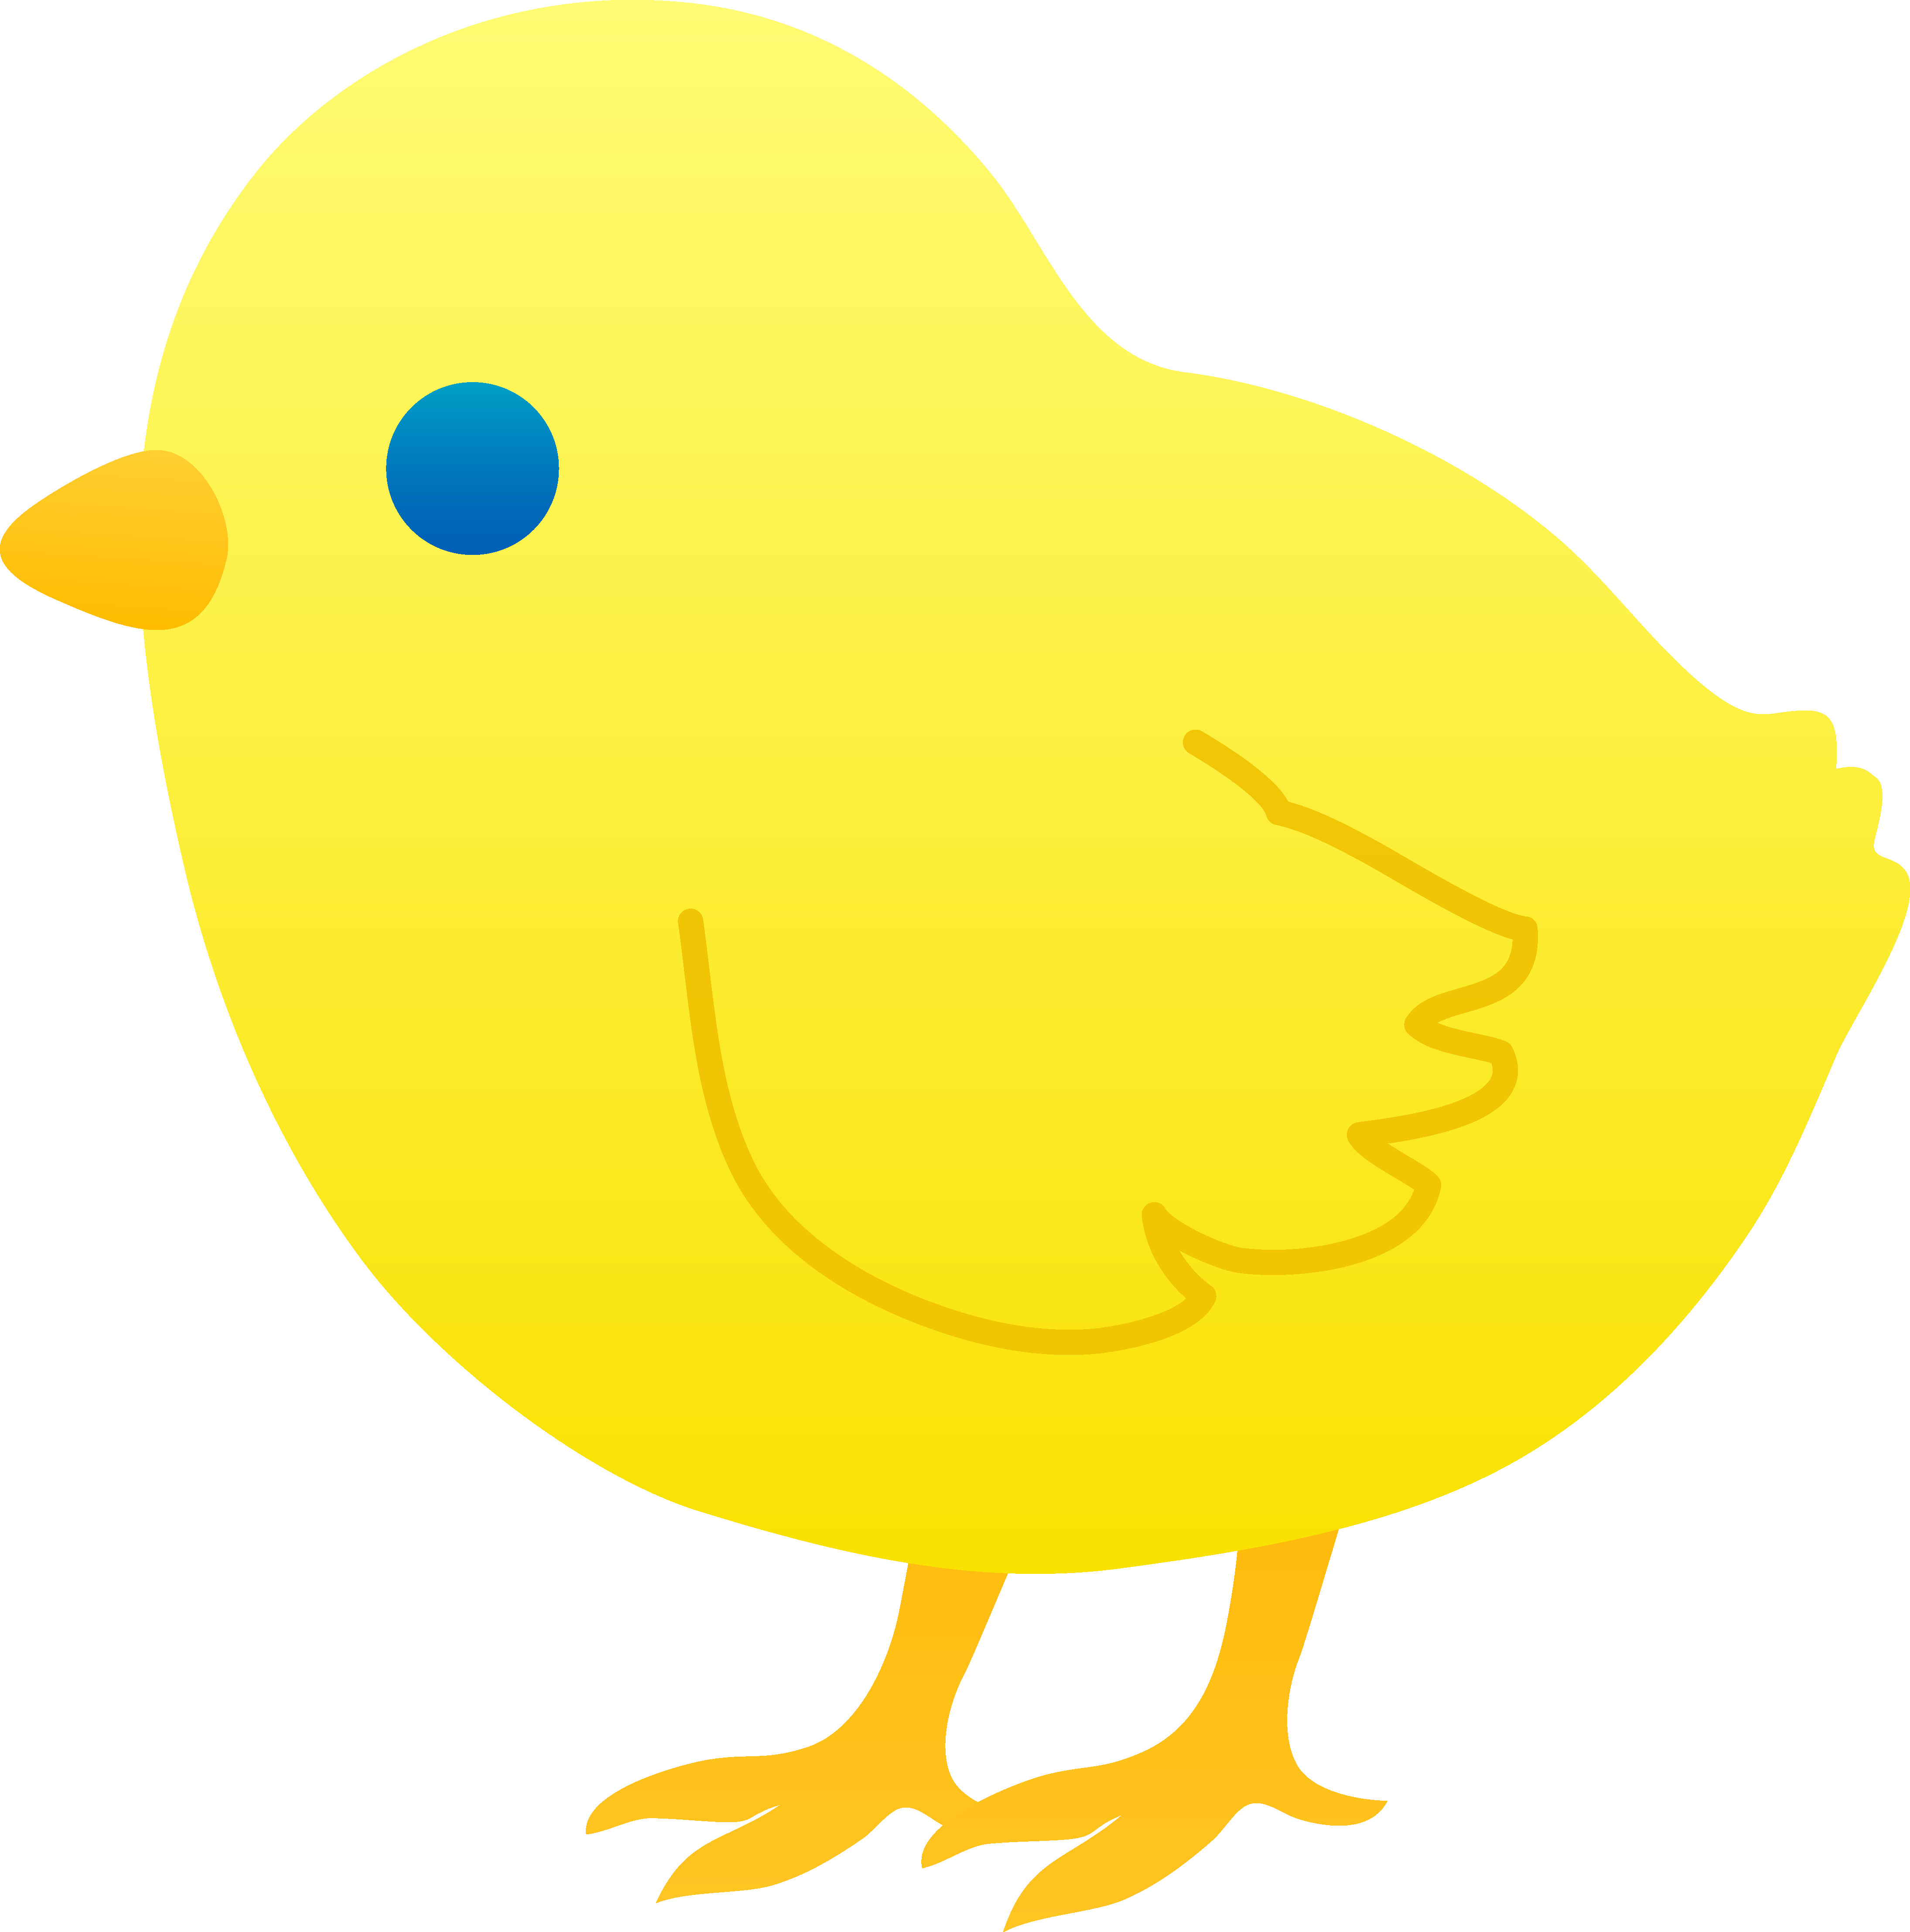 A Yellow Bird With Blue Eyes